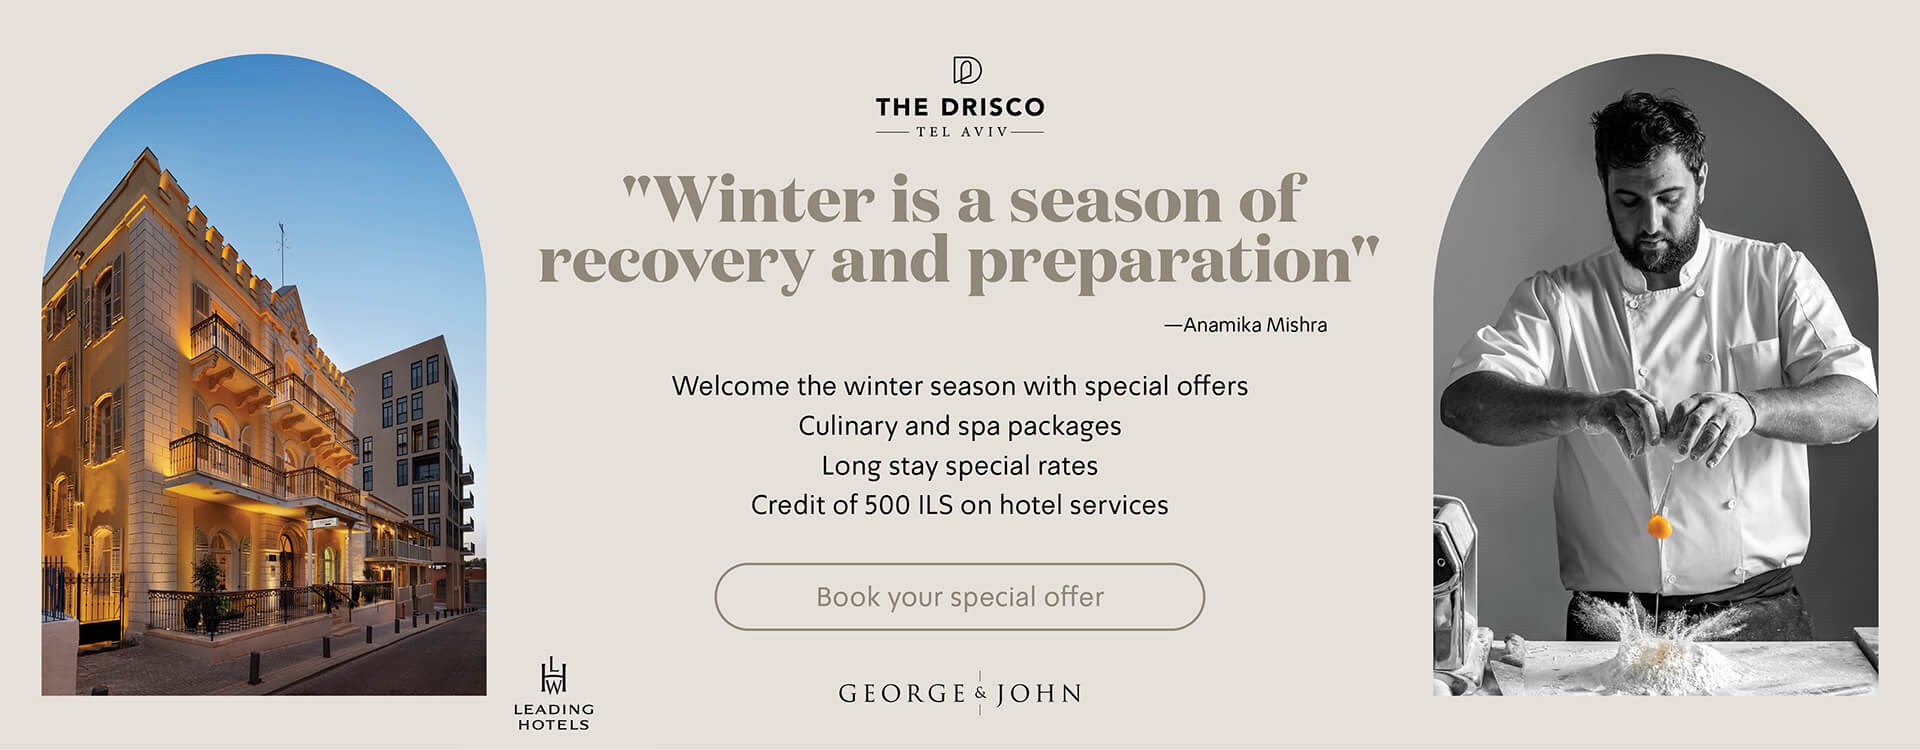 The Drisco - Winter Special Offers